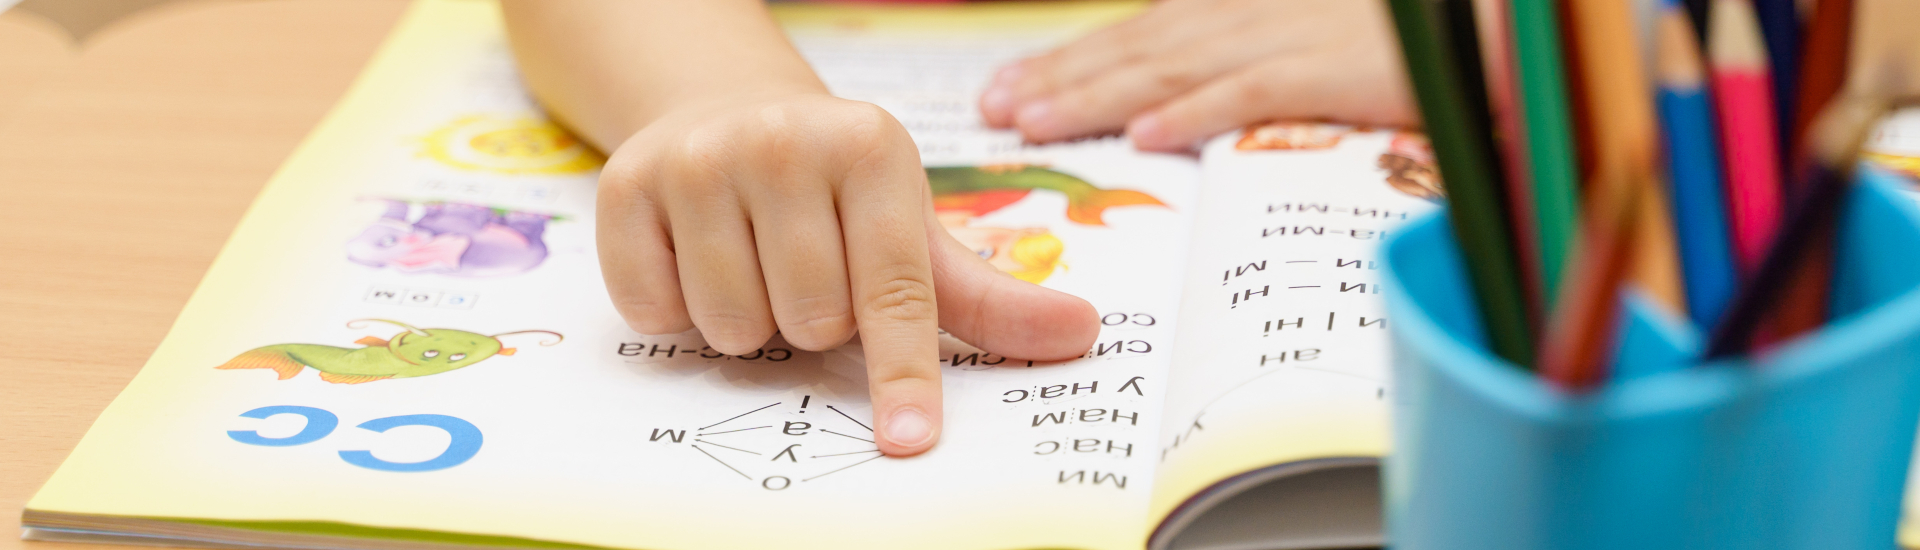 small child pointing to images and text in a workbook